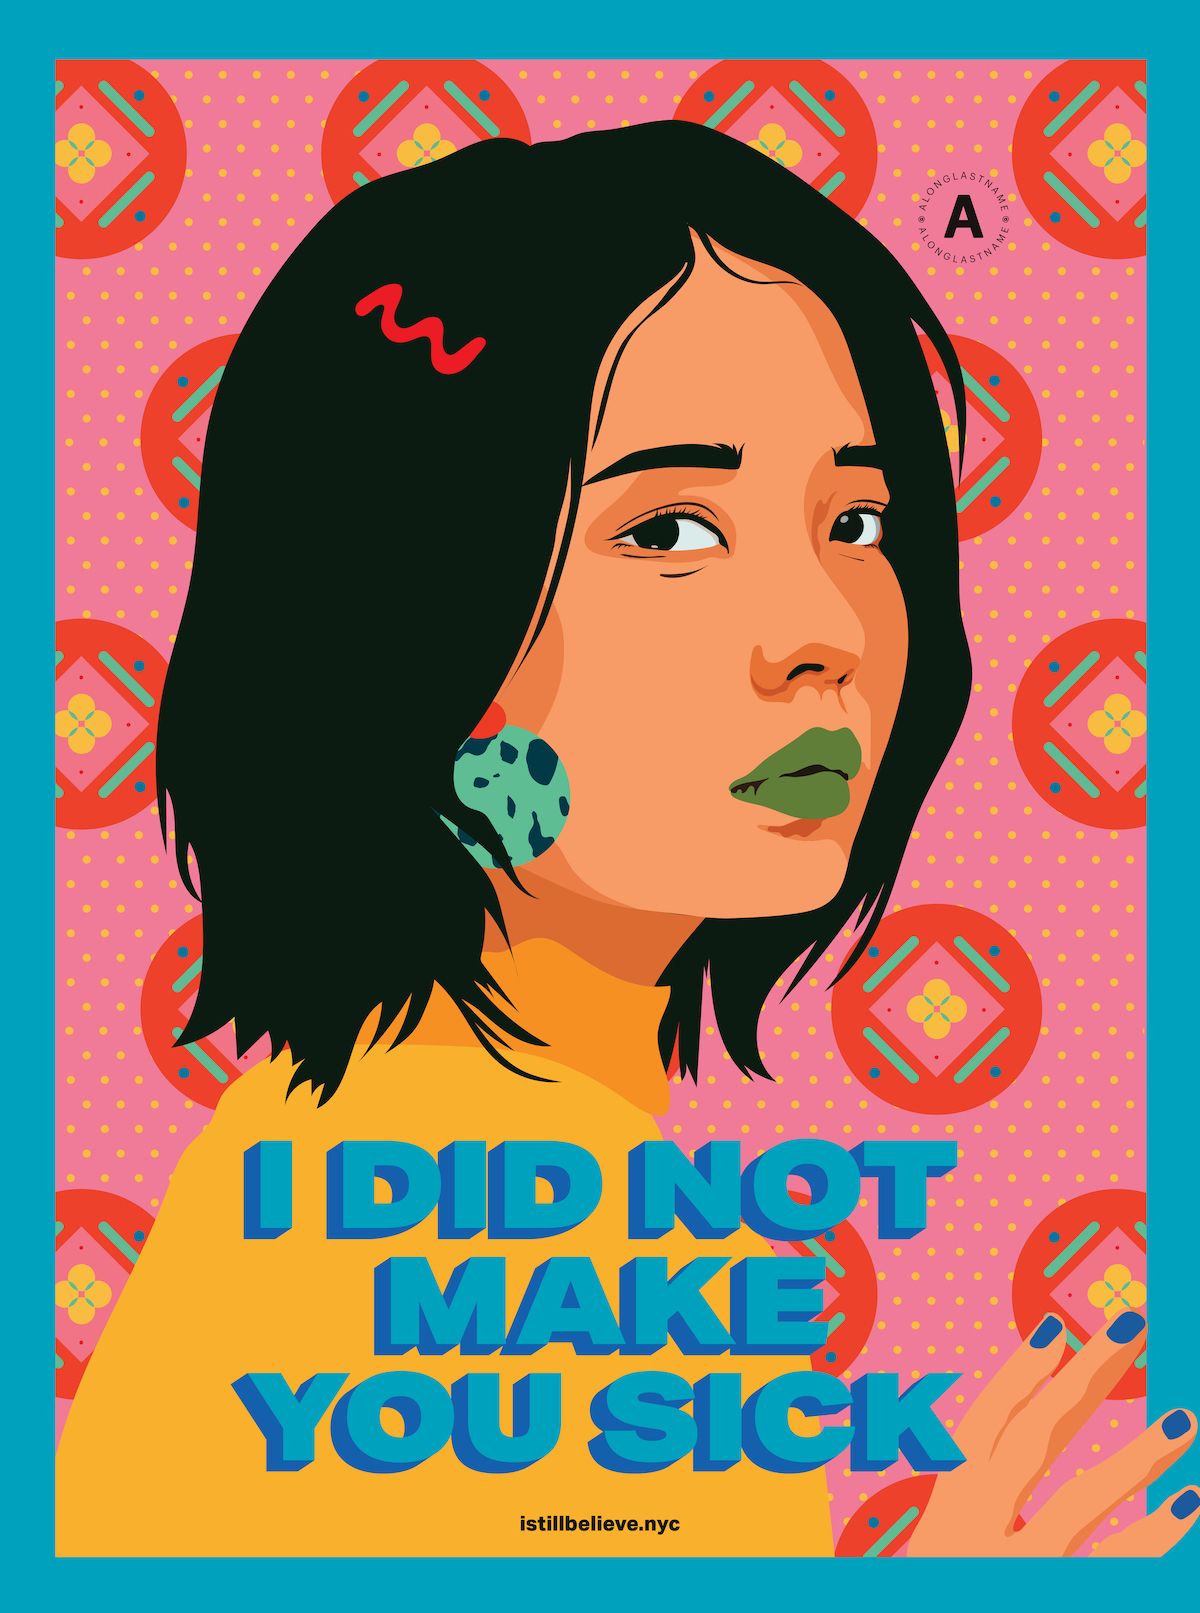 Amanda Phingbodhipakkiya, I Did Not Make You Sick from the I Still Believe in Our City (2020) series Public Artists in Residence